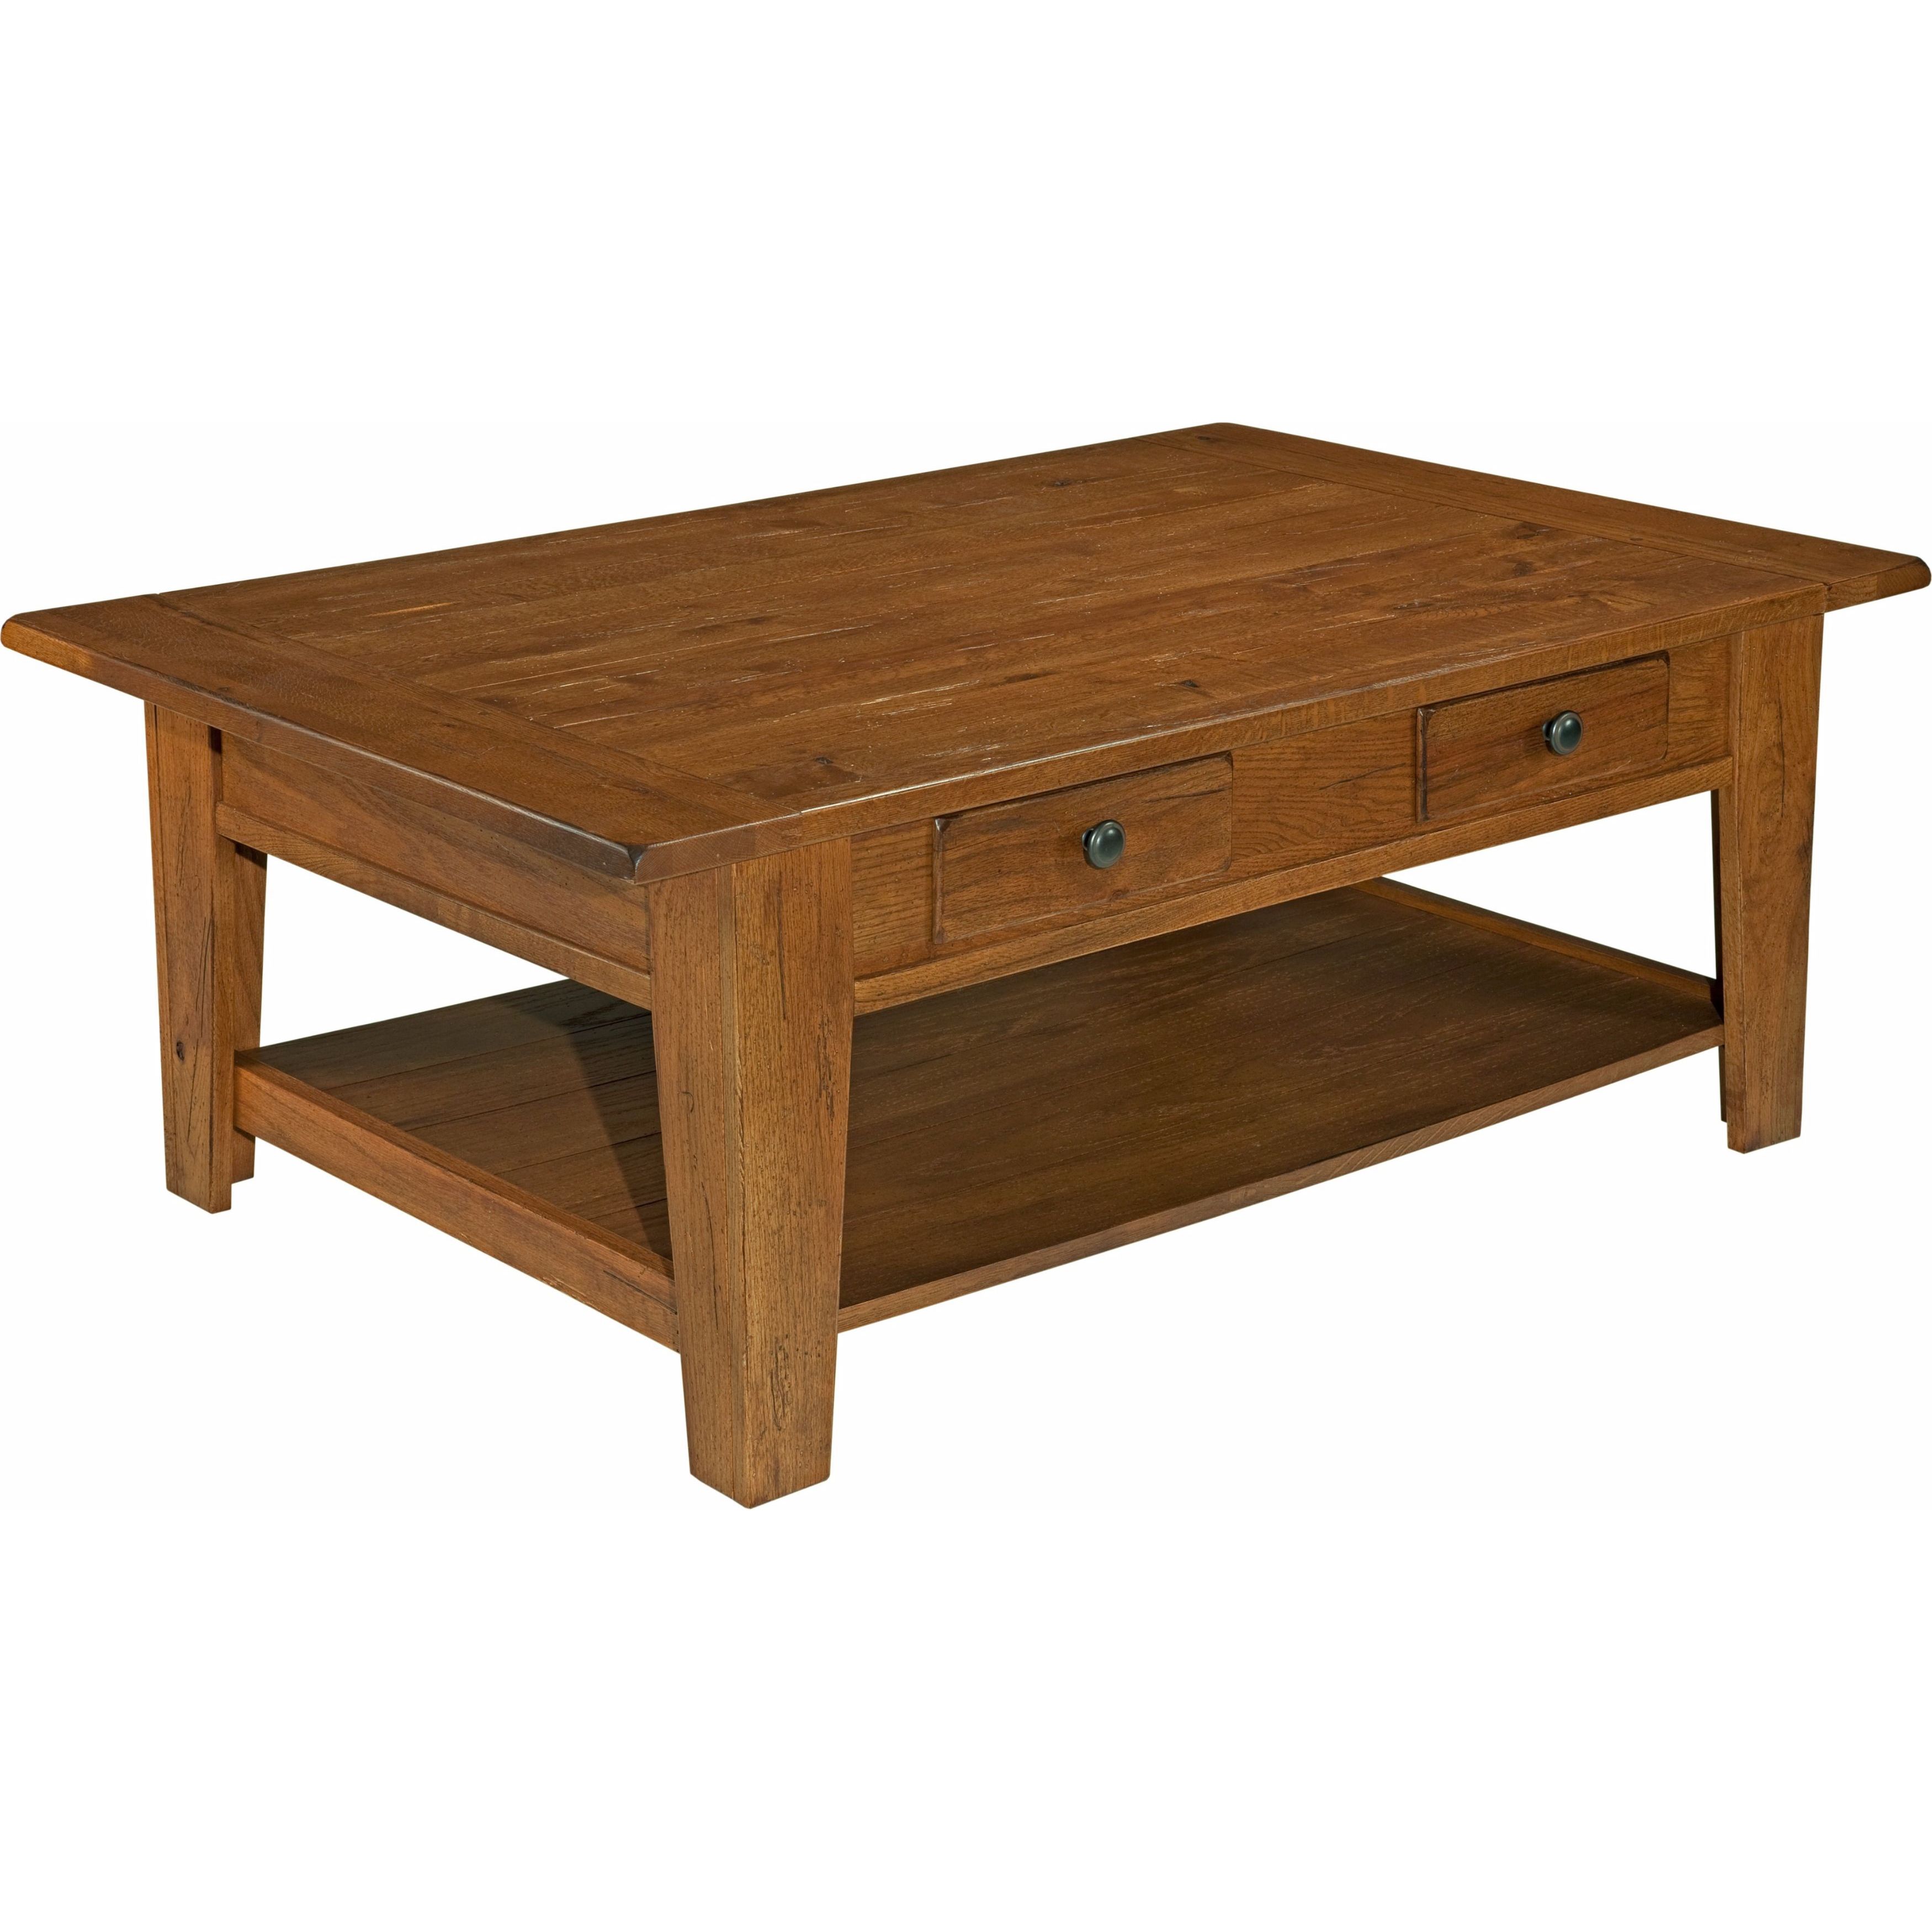 Shop Broyhill Attic Heirlooms Rectangular Cocktail Table